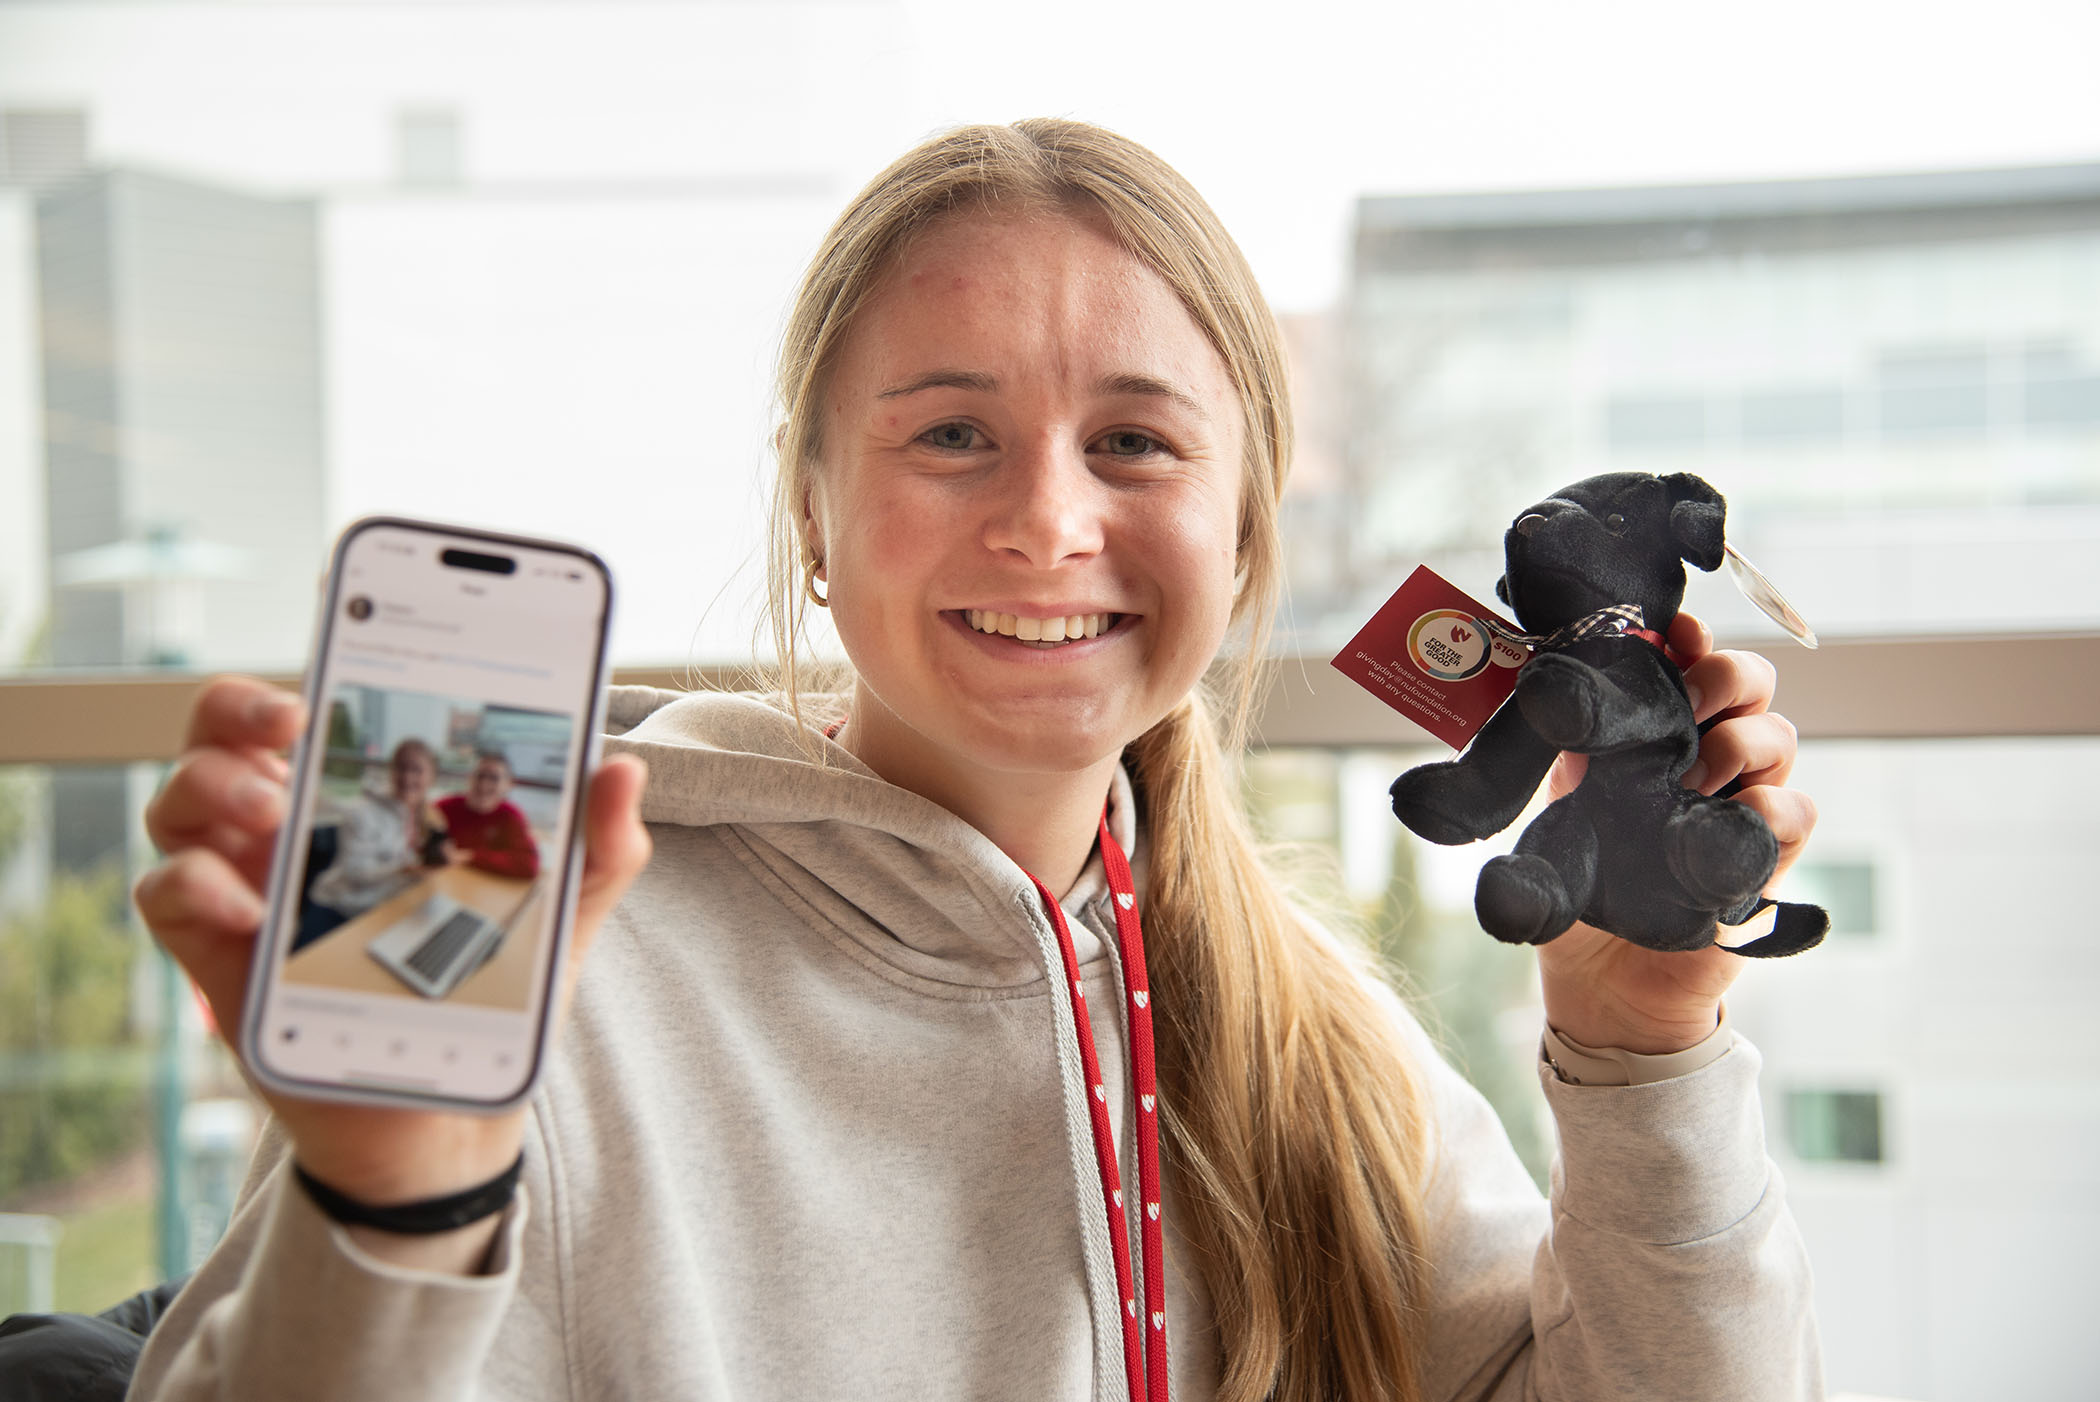 Student Peyton Hainline&comma; from the UNMC College of Allied Health Professions&comma; found one of 10 plush Ellie labs hidden across UNMC&apos;s Omaha campus&comma; offering a gift value she could donate to her preferred cause&comma; and posted her find online&period;